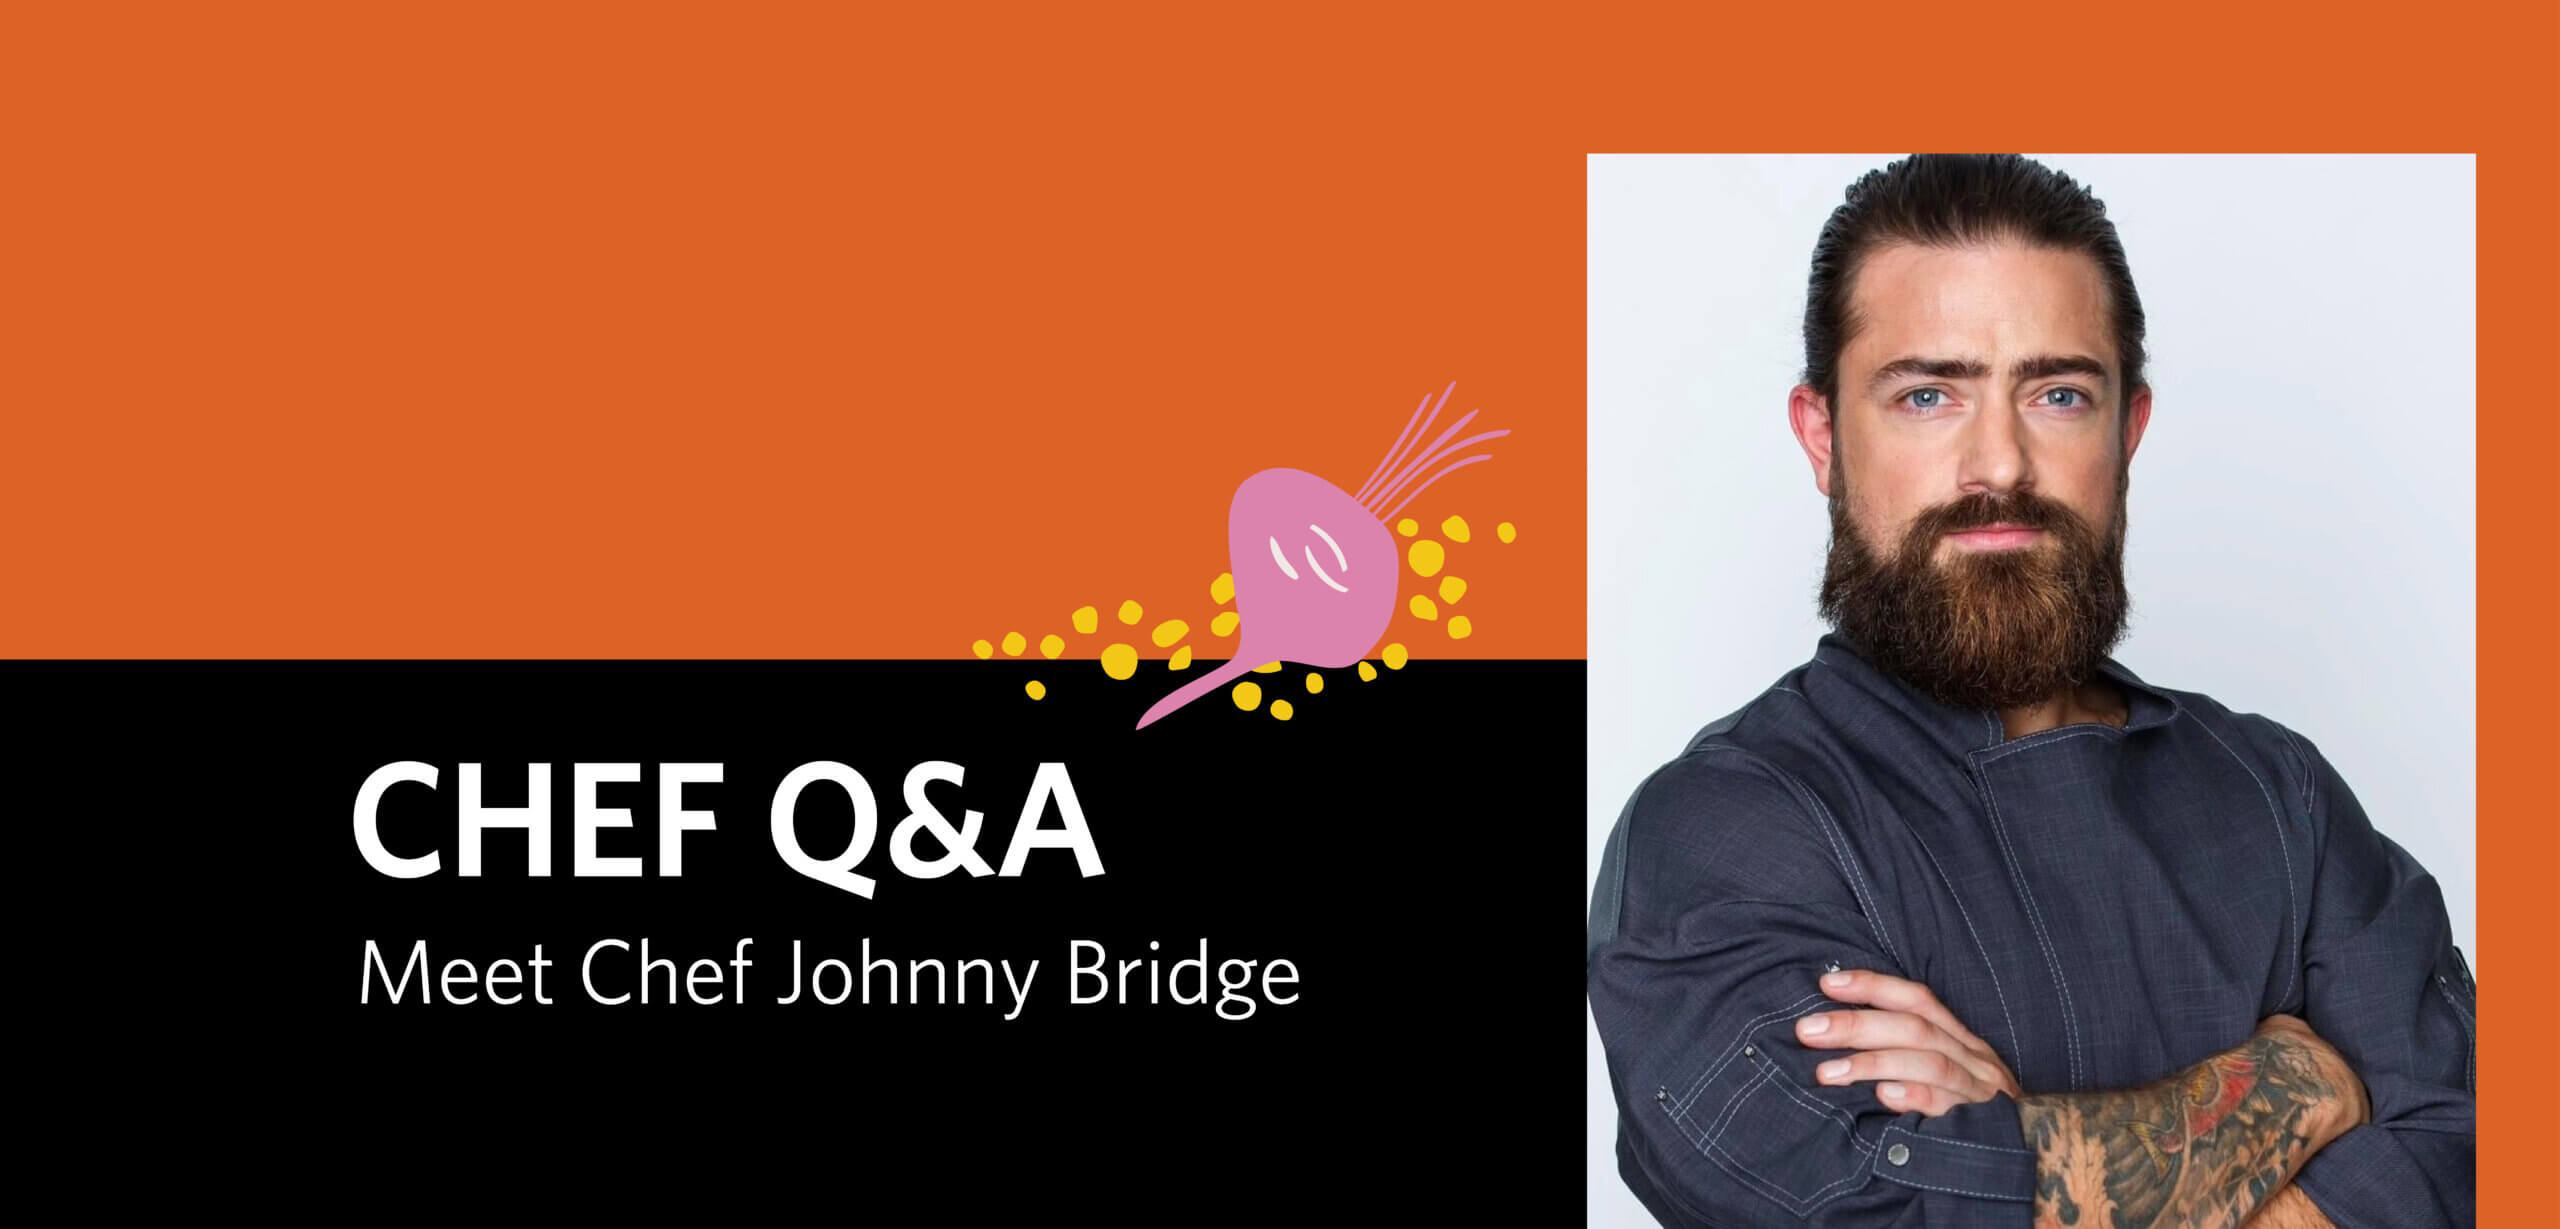 Image of Gather's Residence Dining Sous Chef Johnny Bridge beside the text "CHEF Q&A: Meet Chef Johnny Bridge" with an illustration of a beet.